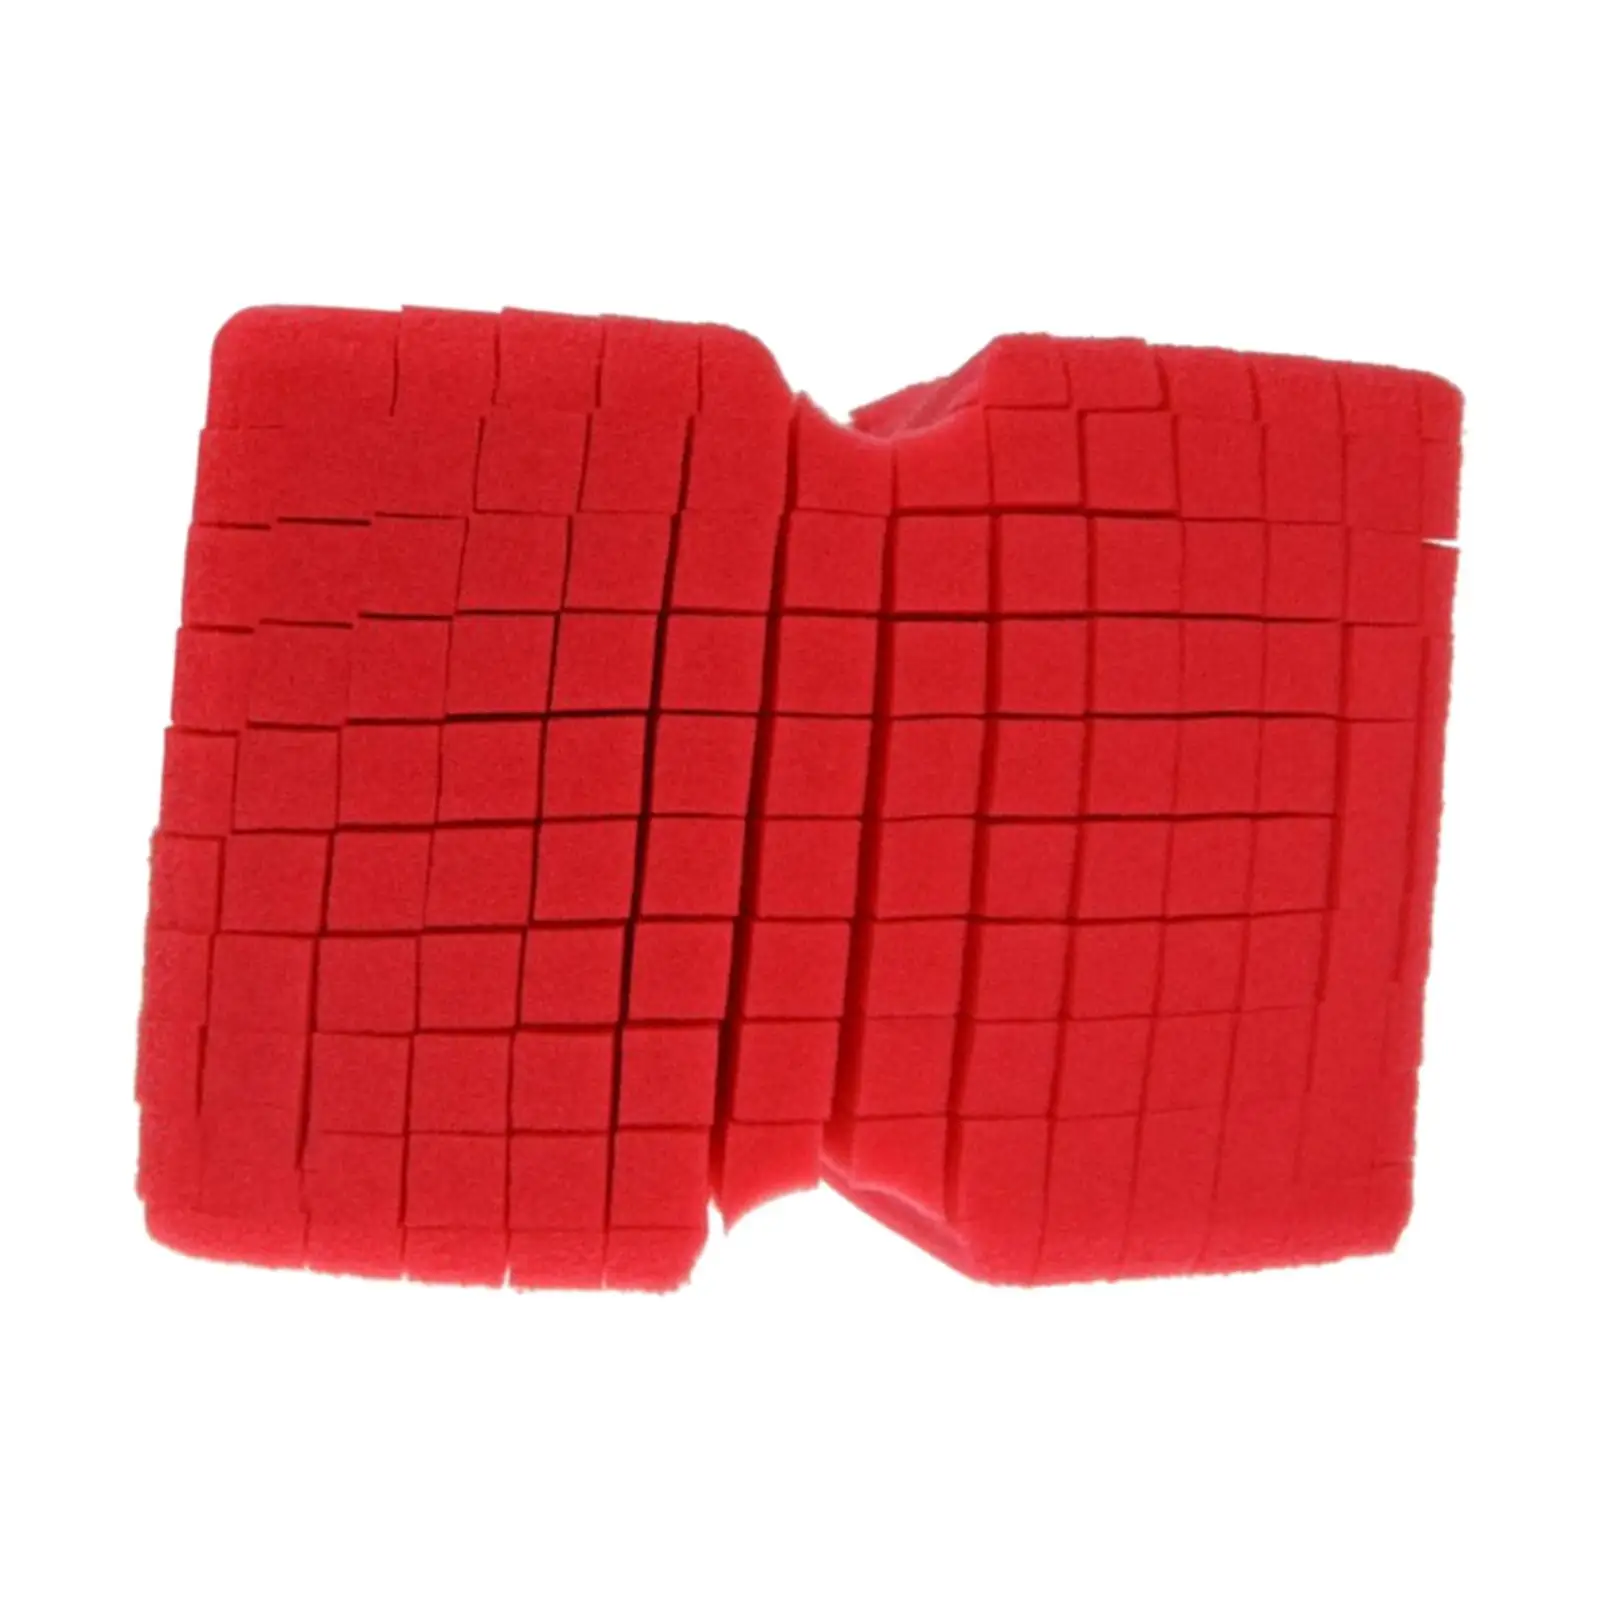 Damp Clean Duster Sponge Durable Non Scratch Functional Thick Household Cleaning Sponge for Boats Motorcycles and Furniture